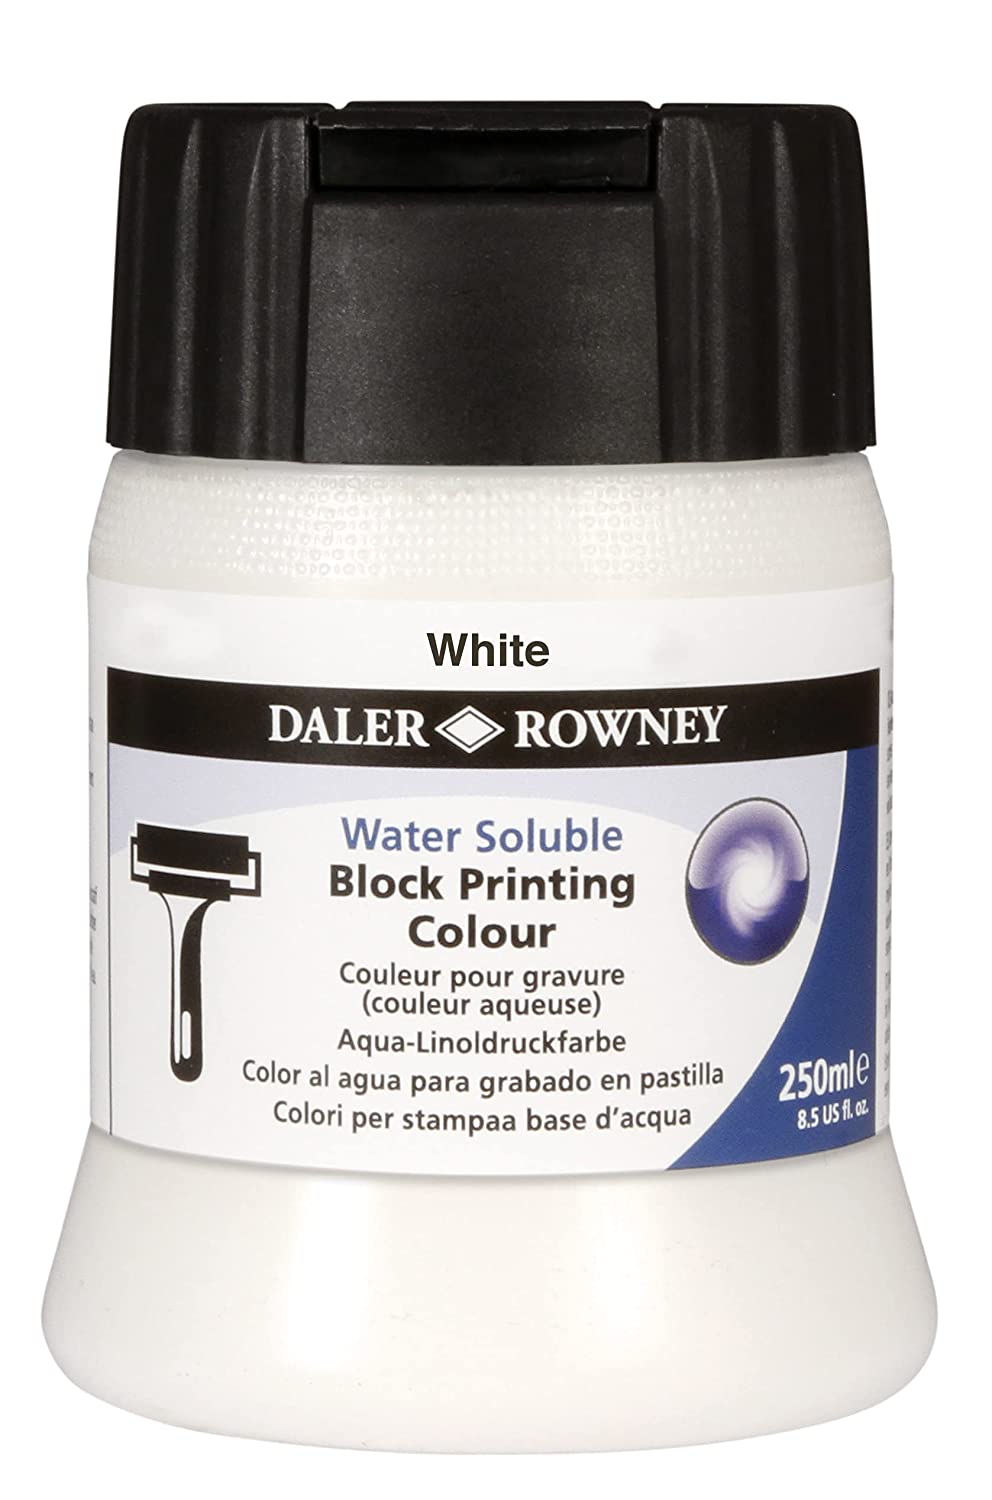 Daler-Rowney Water Soluble Block Printing Colour